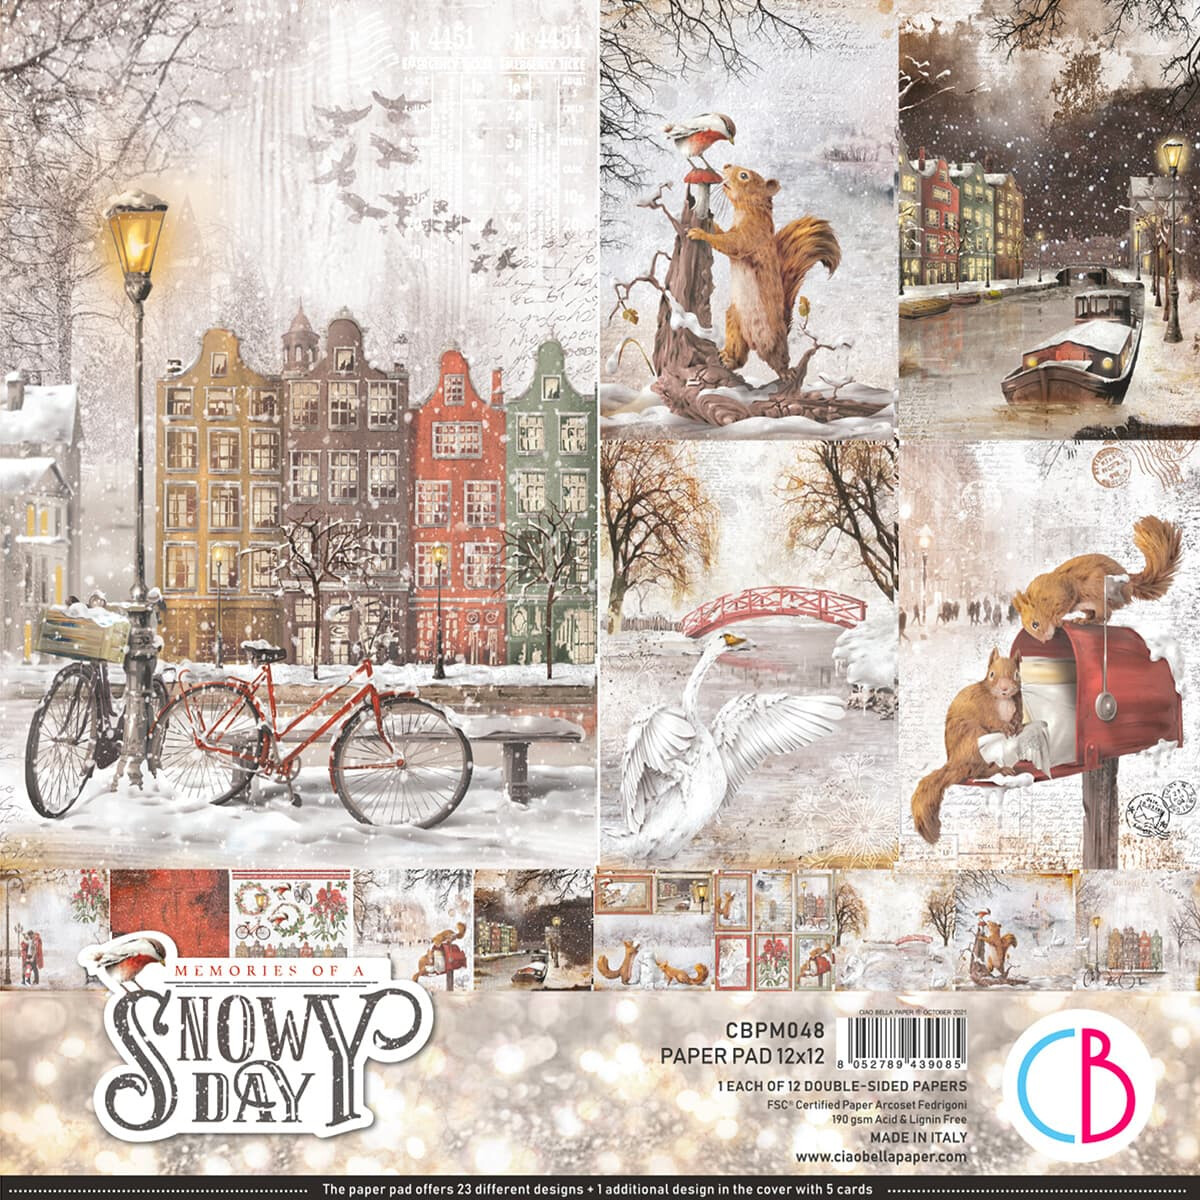 Memories of a Snowy Day 12x12 - Ciao Bella